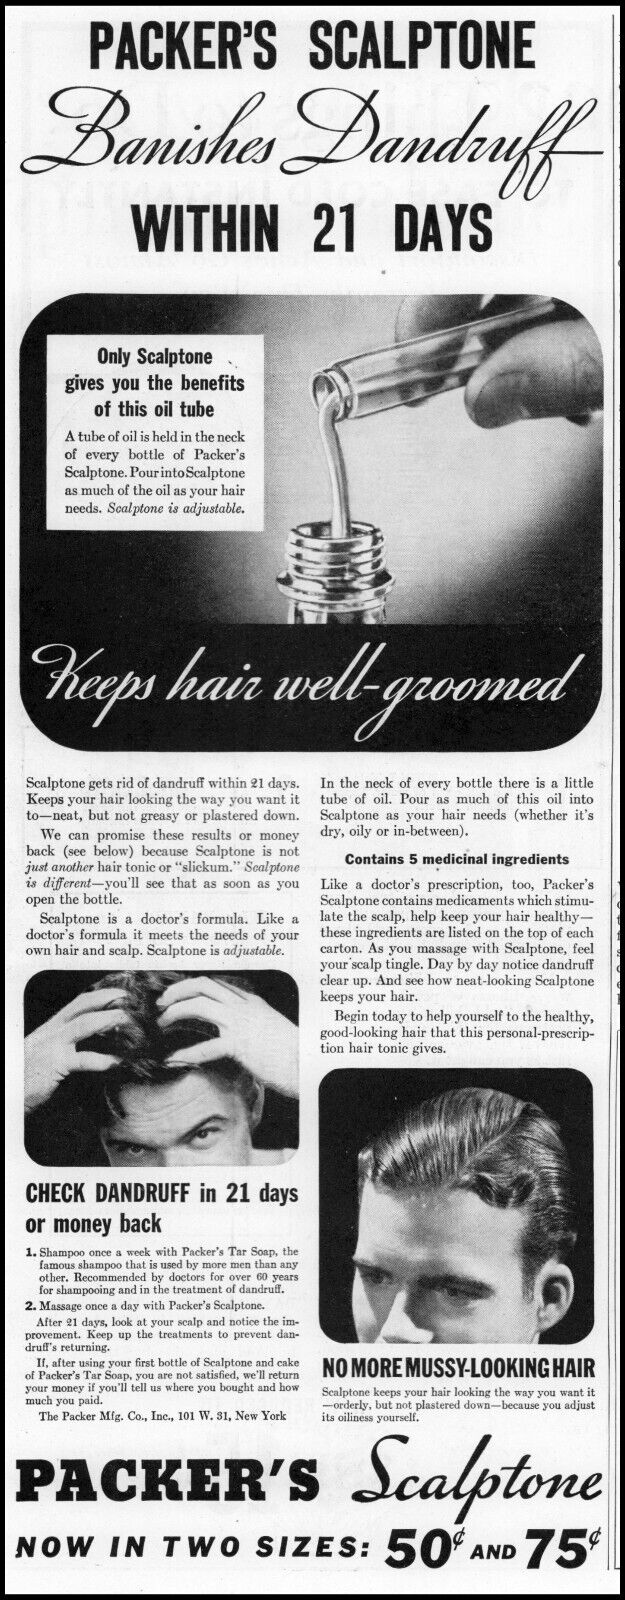 1935 Packer\'s Scalptone banishes dandruff in 21 days vintage photo print ad L77